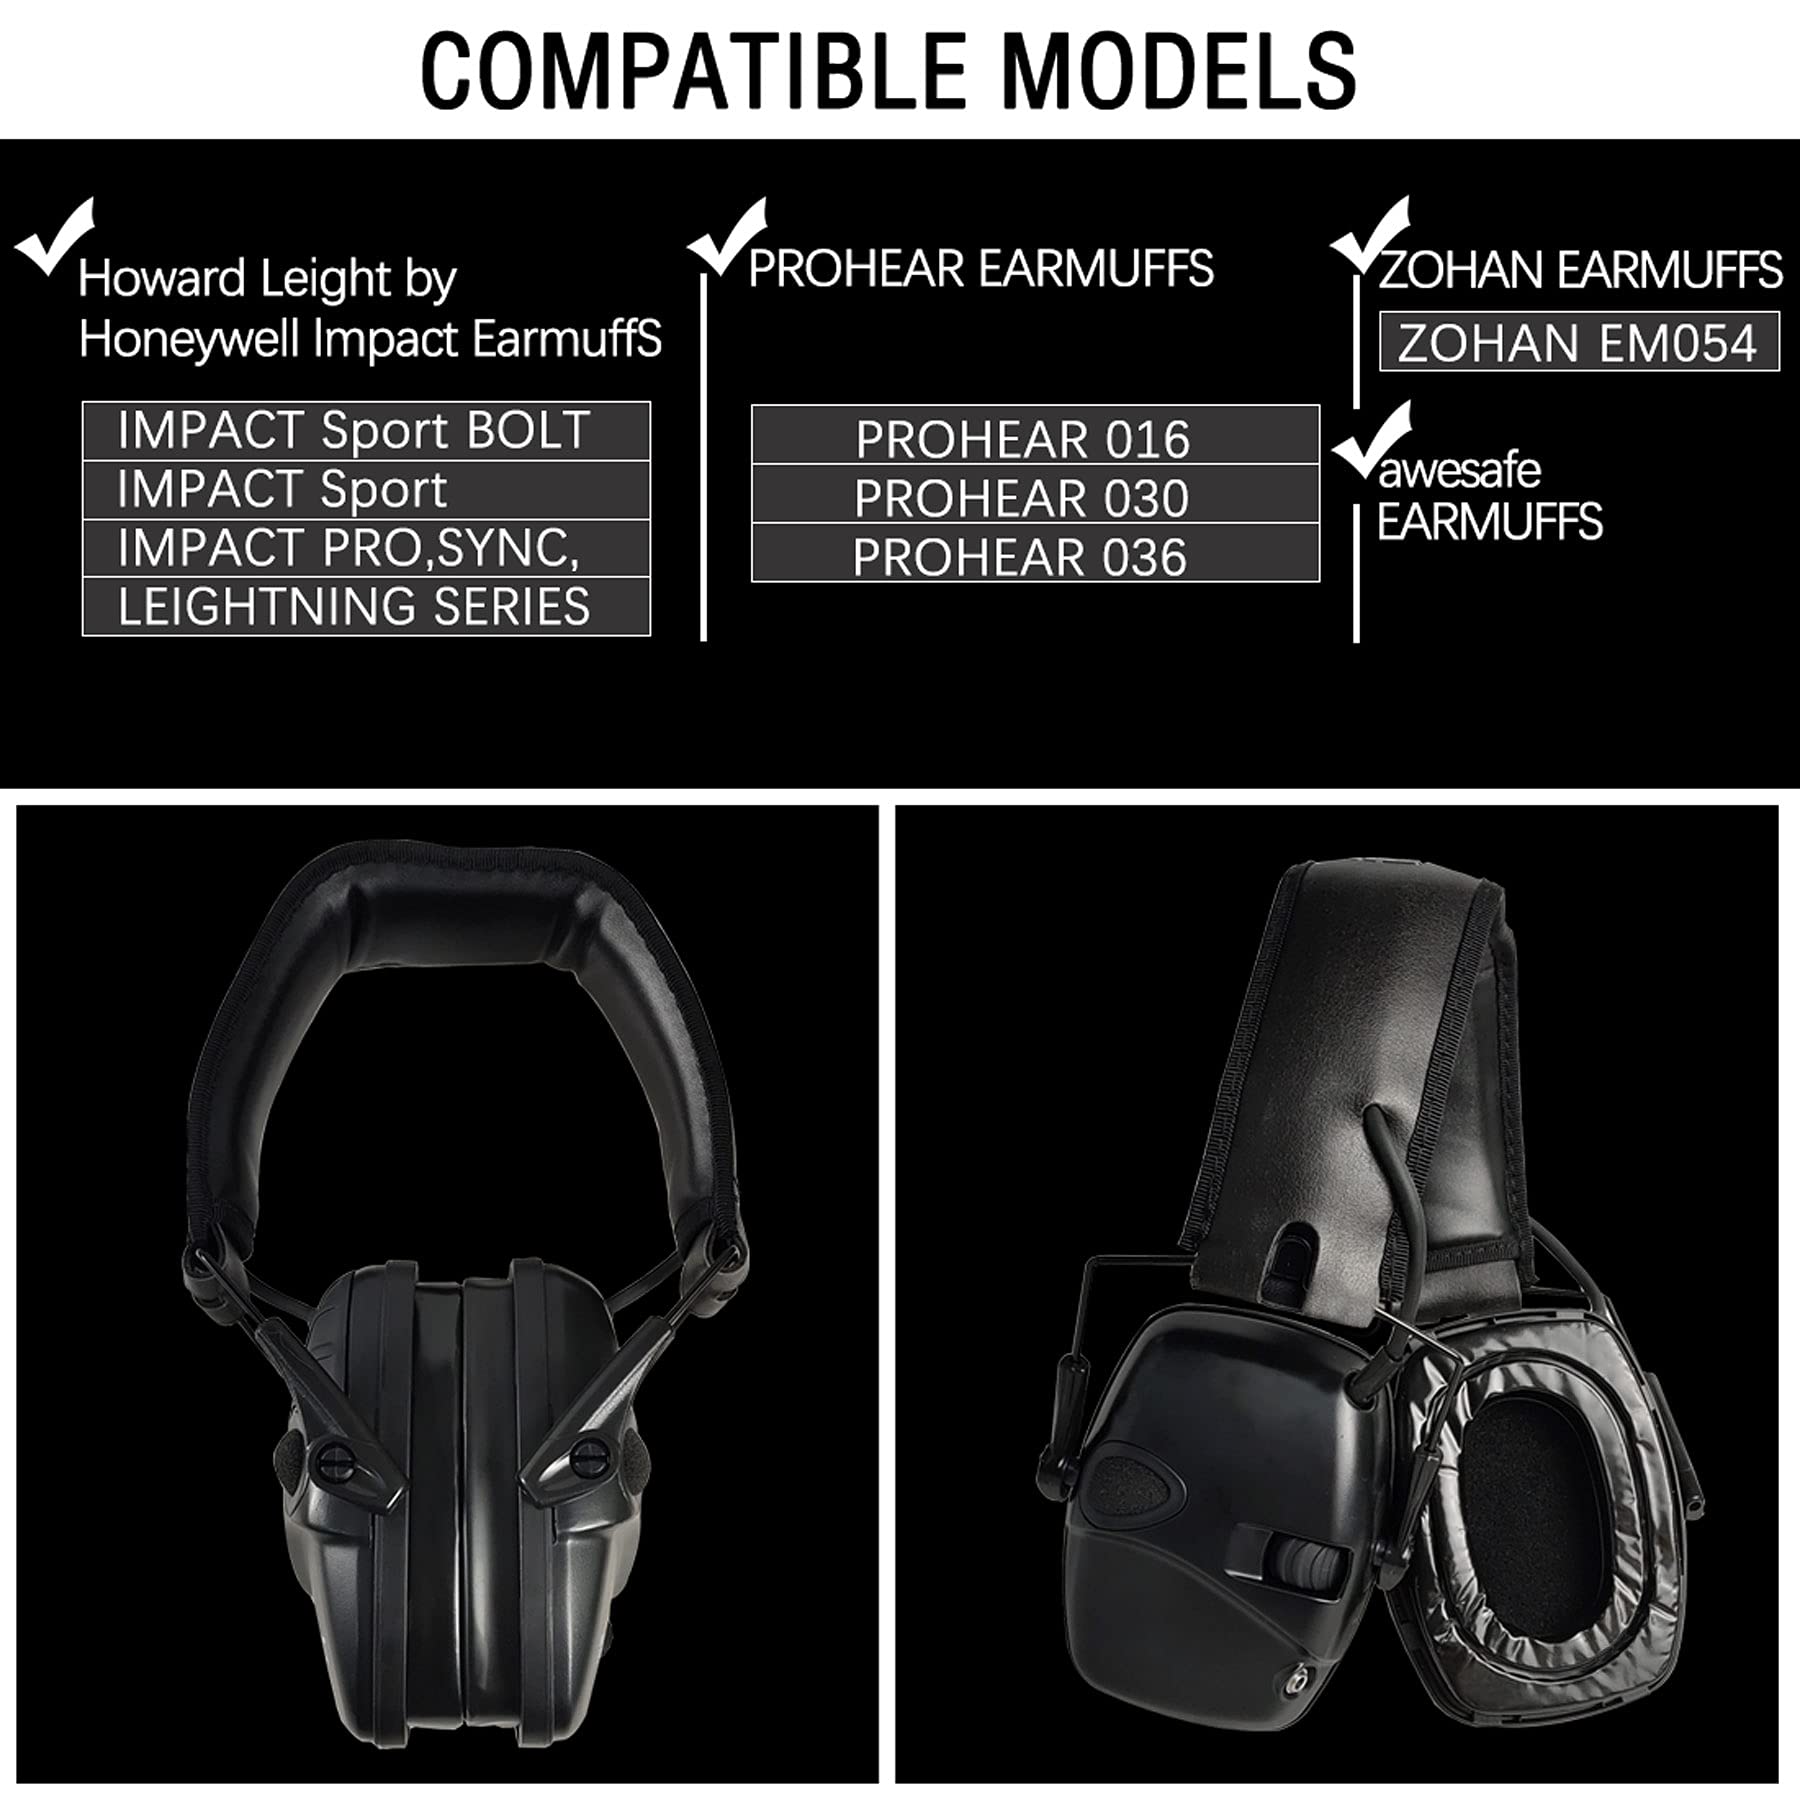 PROHEAR GEP02 Gel Ear Pads for Howard Leight by Honeywell Impact Sport Pro Sync Leightning Earmuffs